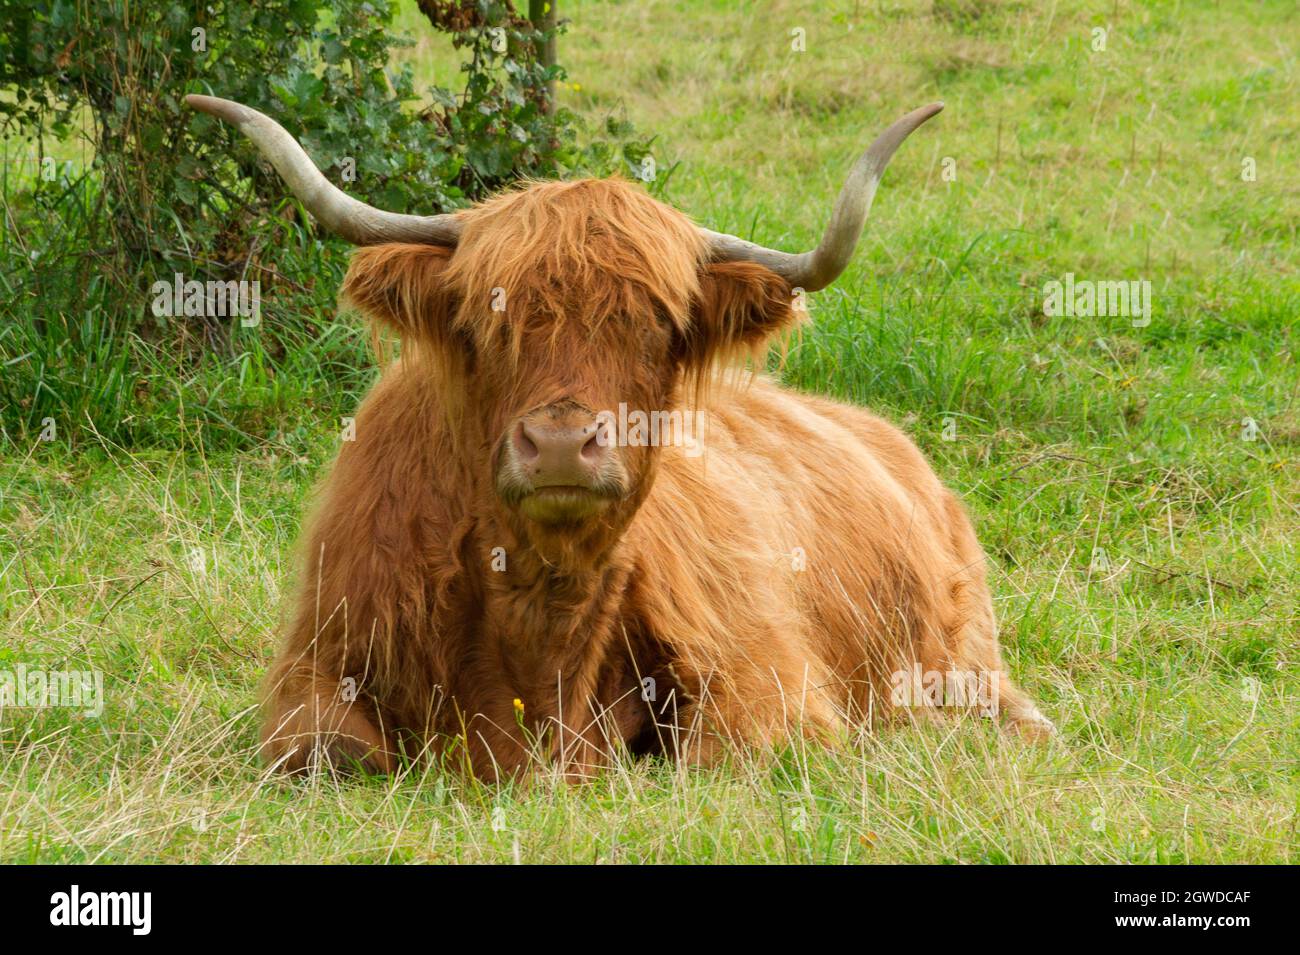 Portrait of a long-horned highland cow in a meadow Stock Photo